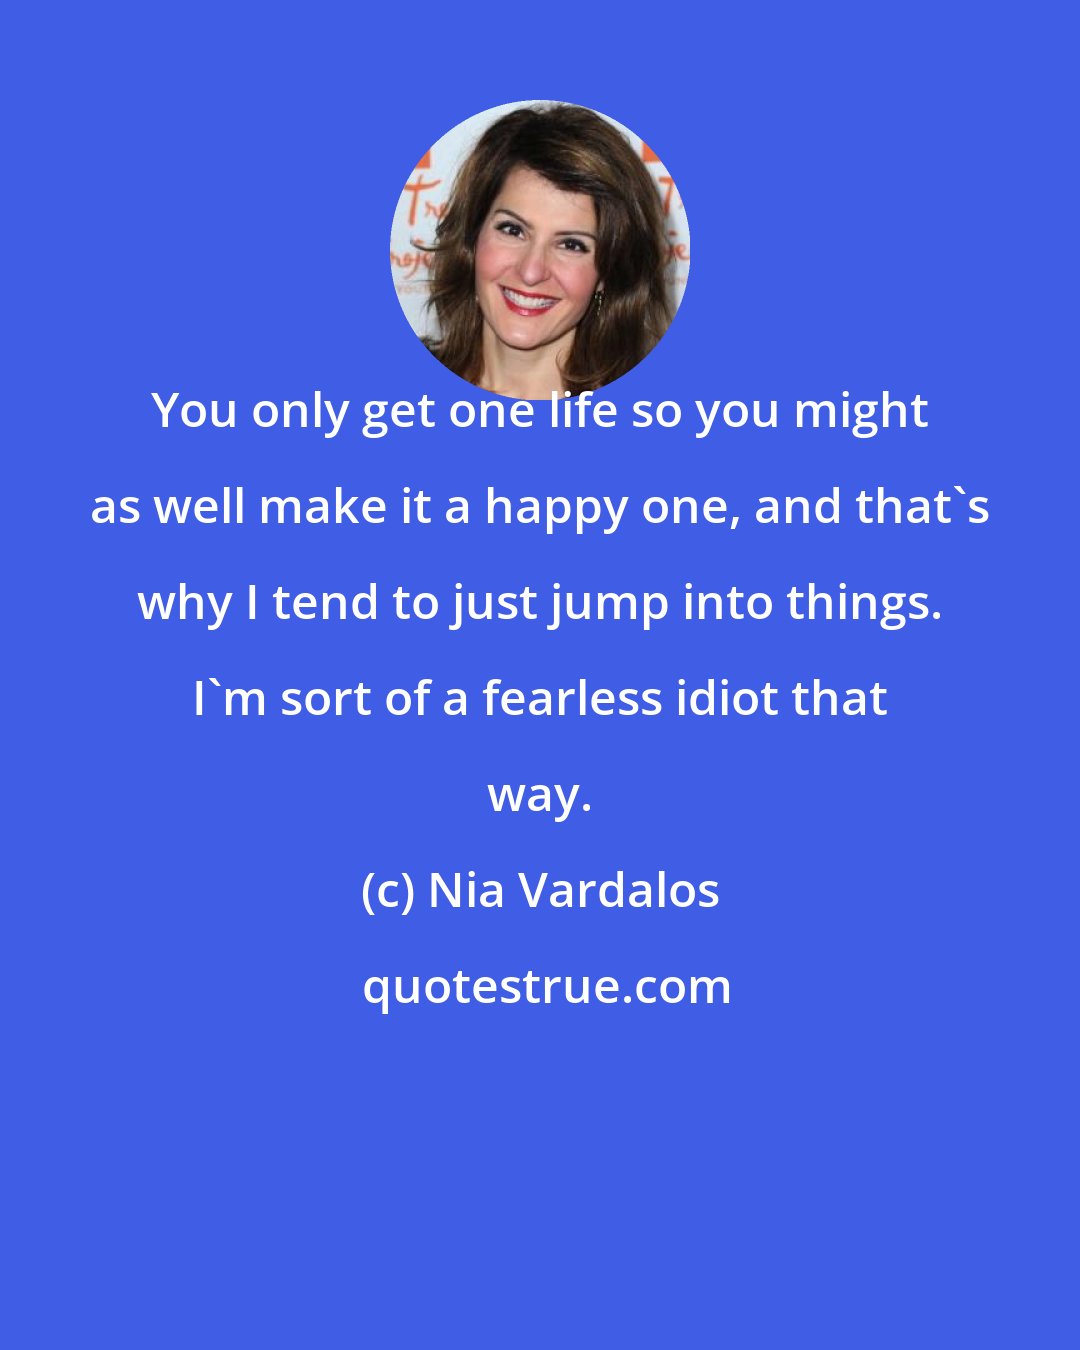 Nia Vardalos: You only get one life so you might as well make it a happy one, and that's why I tend to just jump into things. I'm sort of a fearless idiot that way.